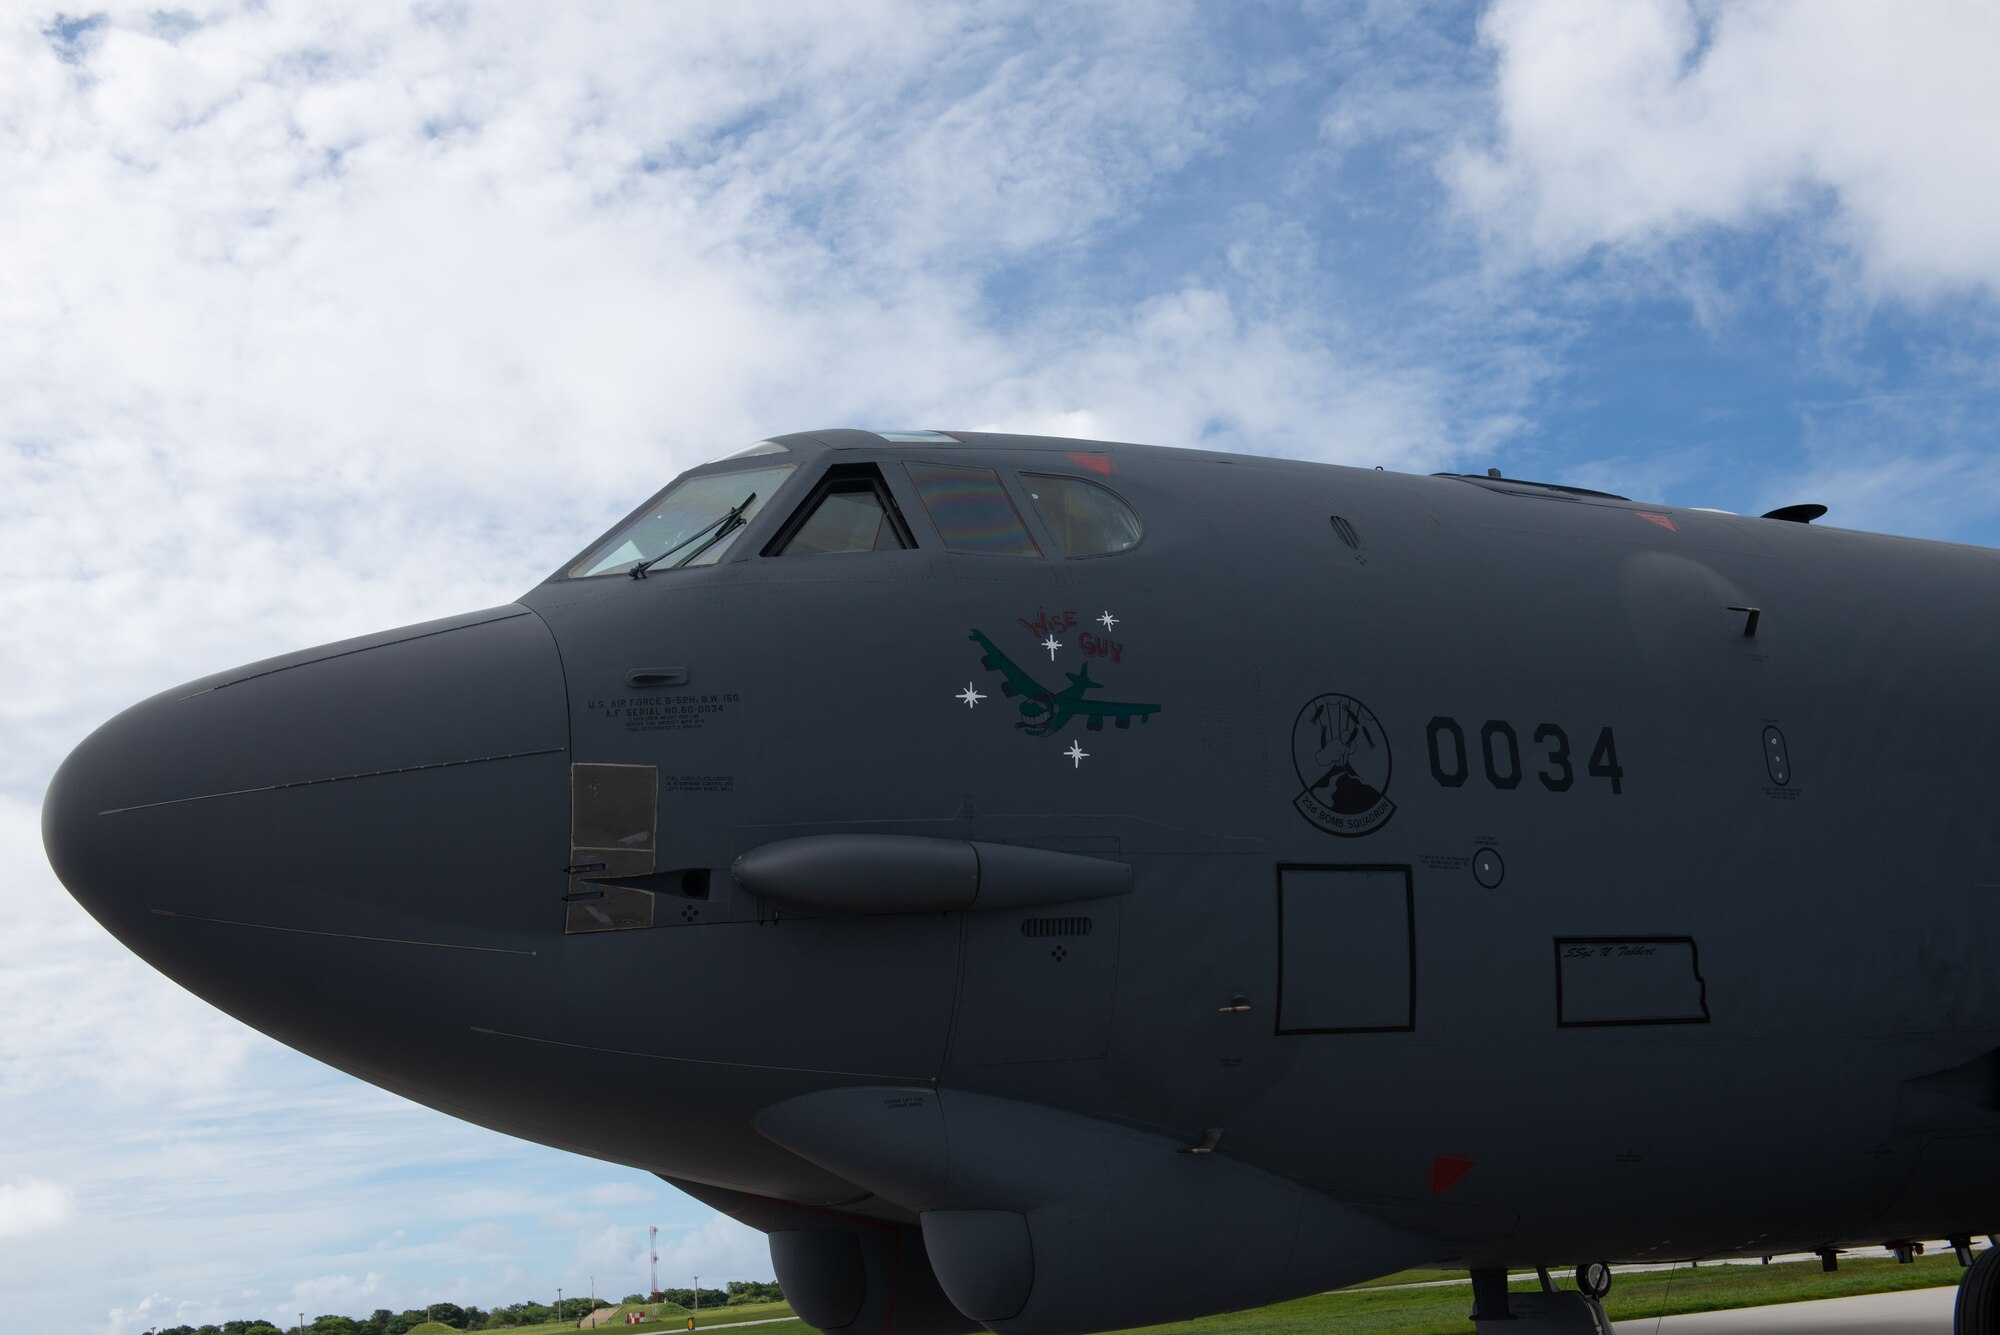 U.S. Air Force B-52H Stratofortress from the 5th Bomb Wing, Minot Air Force Base North Dakota, arrives at Andersen Air Force Base, Guam, for a Bomber Task Force deployment, July 15, 2021. Bomber Task Force missions demonstrate the strategic credibility and tactical flexibility of U.S. forces in today's security environment across the globe. (U.S. Air Force photo by SSgt Nicholas Crisp)